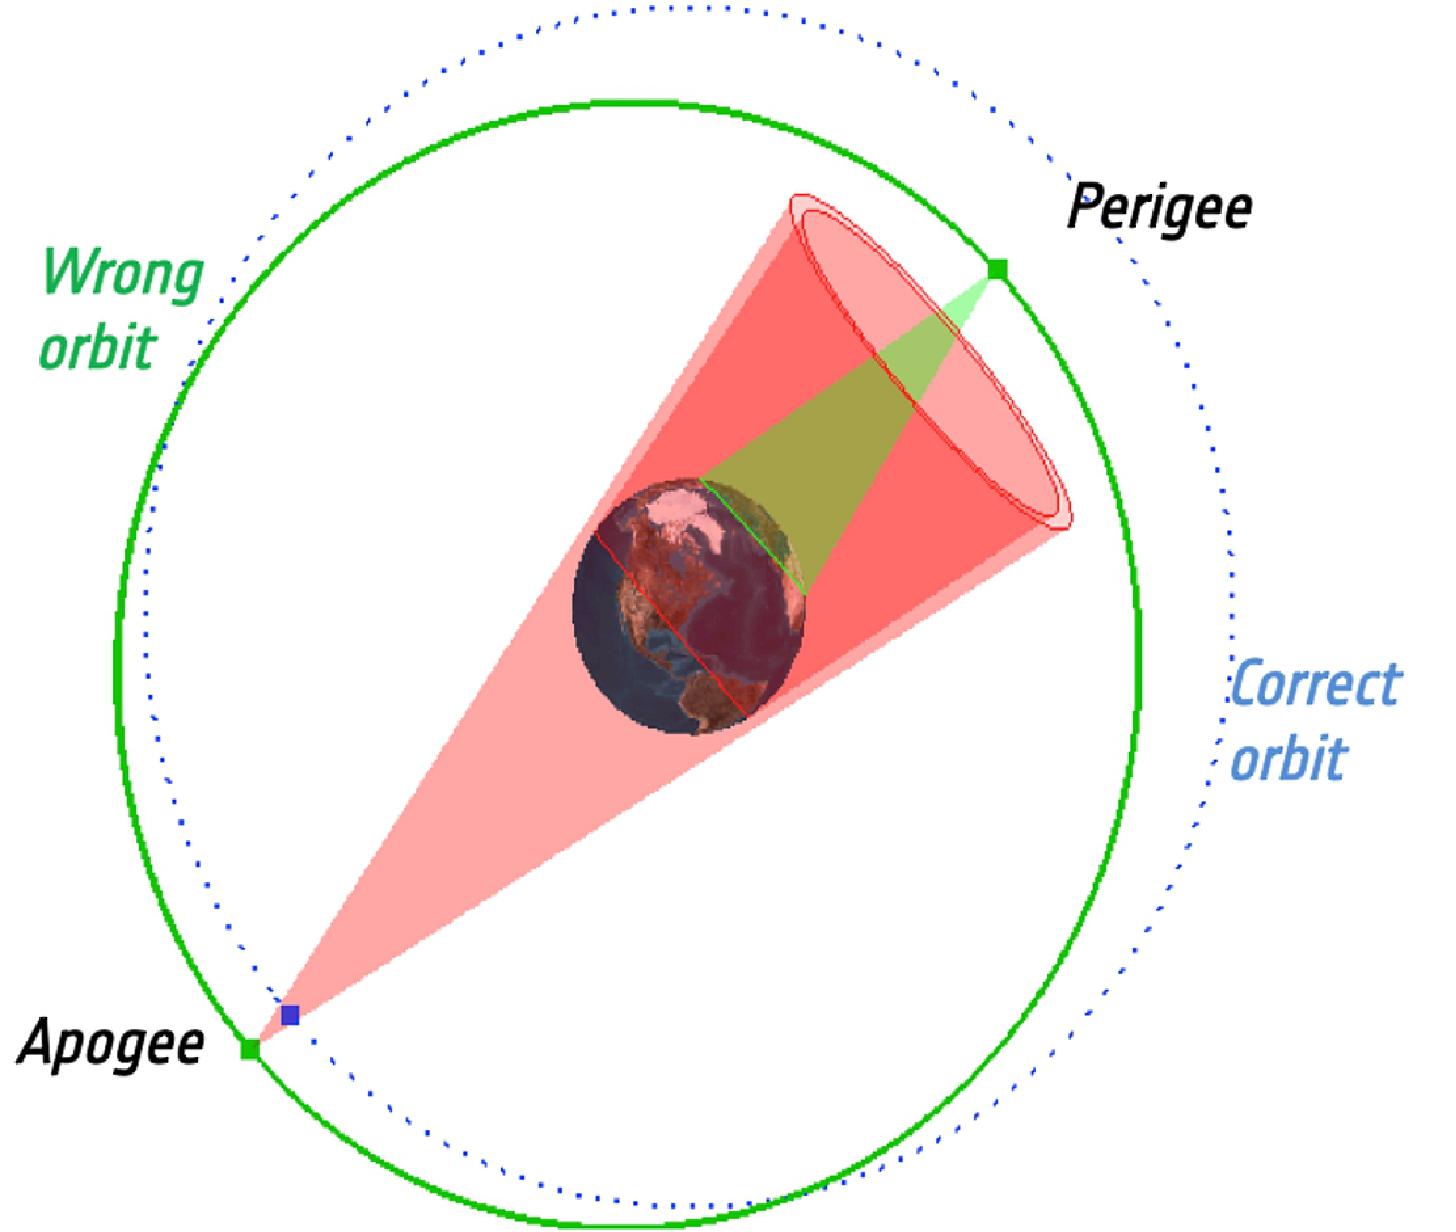 Figure 64: Galileo satellites 5 and 6 were delivered into faulty elongated orbits by a faulty Soyuz upper stage during their launch in 2014. This left them unable to view the entire Earth disc during the low point or perigee of their orbits, rendering their navigation payloads unusable, because they use an Earth sensor to center their signal beams. Subsequent orbital maneuvers succeeded in making their orbits more circular and their navigation payloads usable because they retained views of the entire Earth disc through each orbit. However their orbits remain elliptical compared to the rest of the Galileo constellation. Bottom view from orbital plane of nominal orbit (in blue) and injected orbit (in green) for the pair (image credit: ESA)